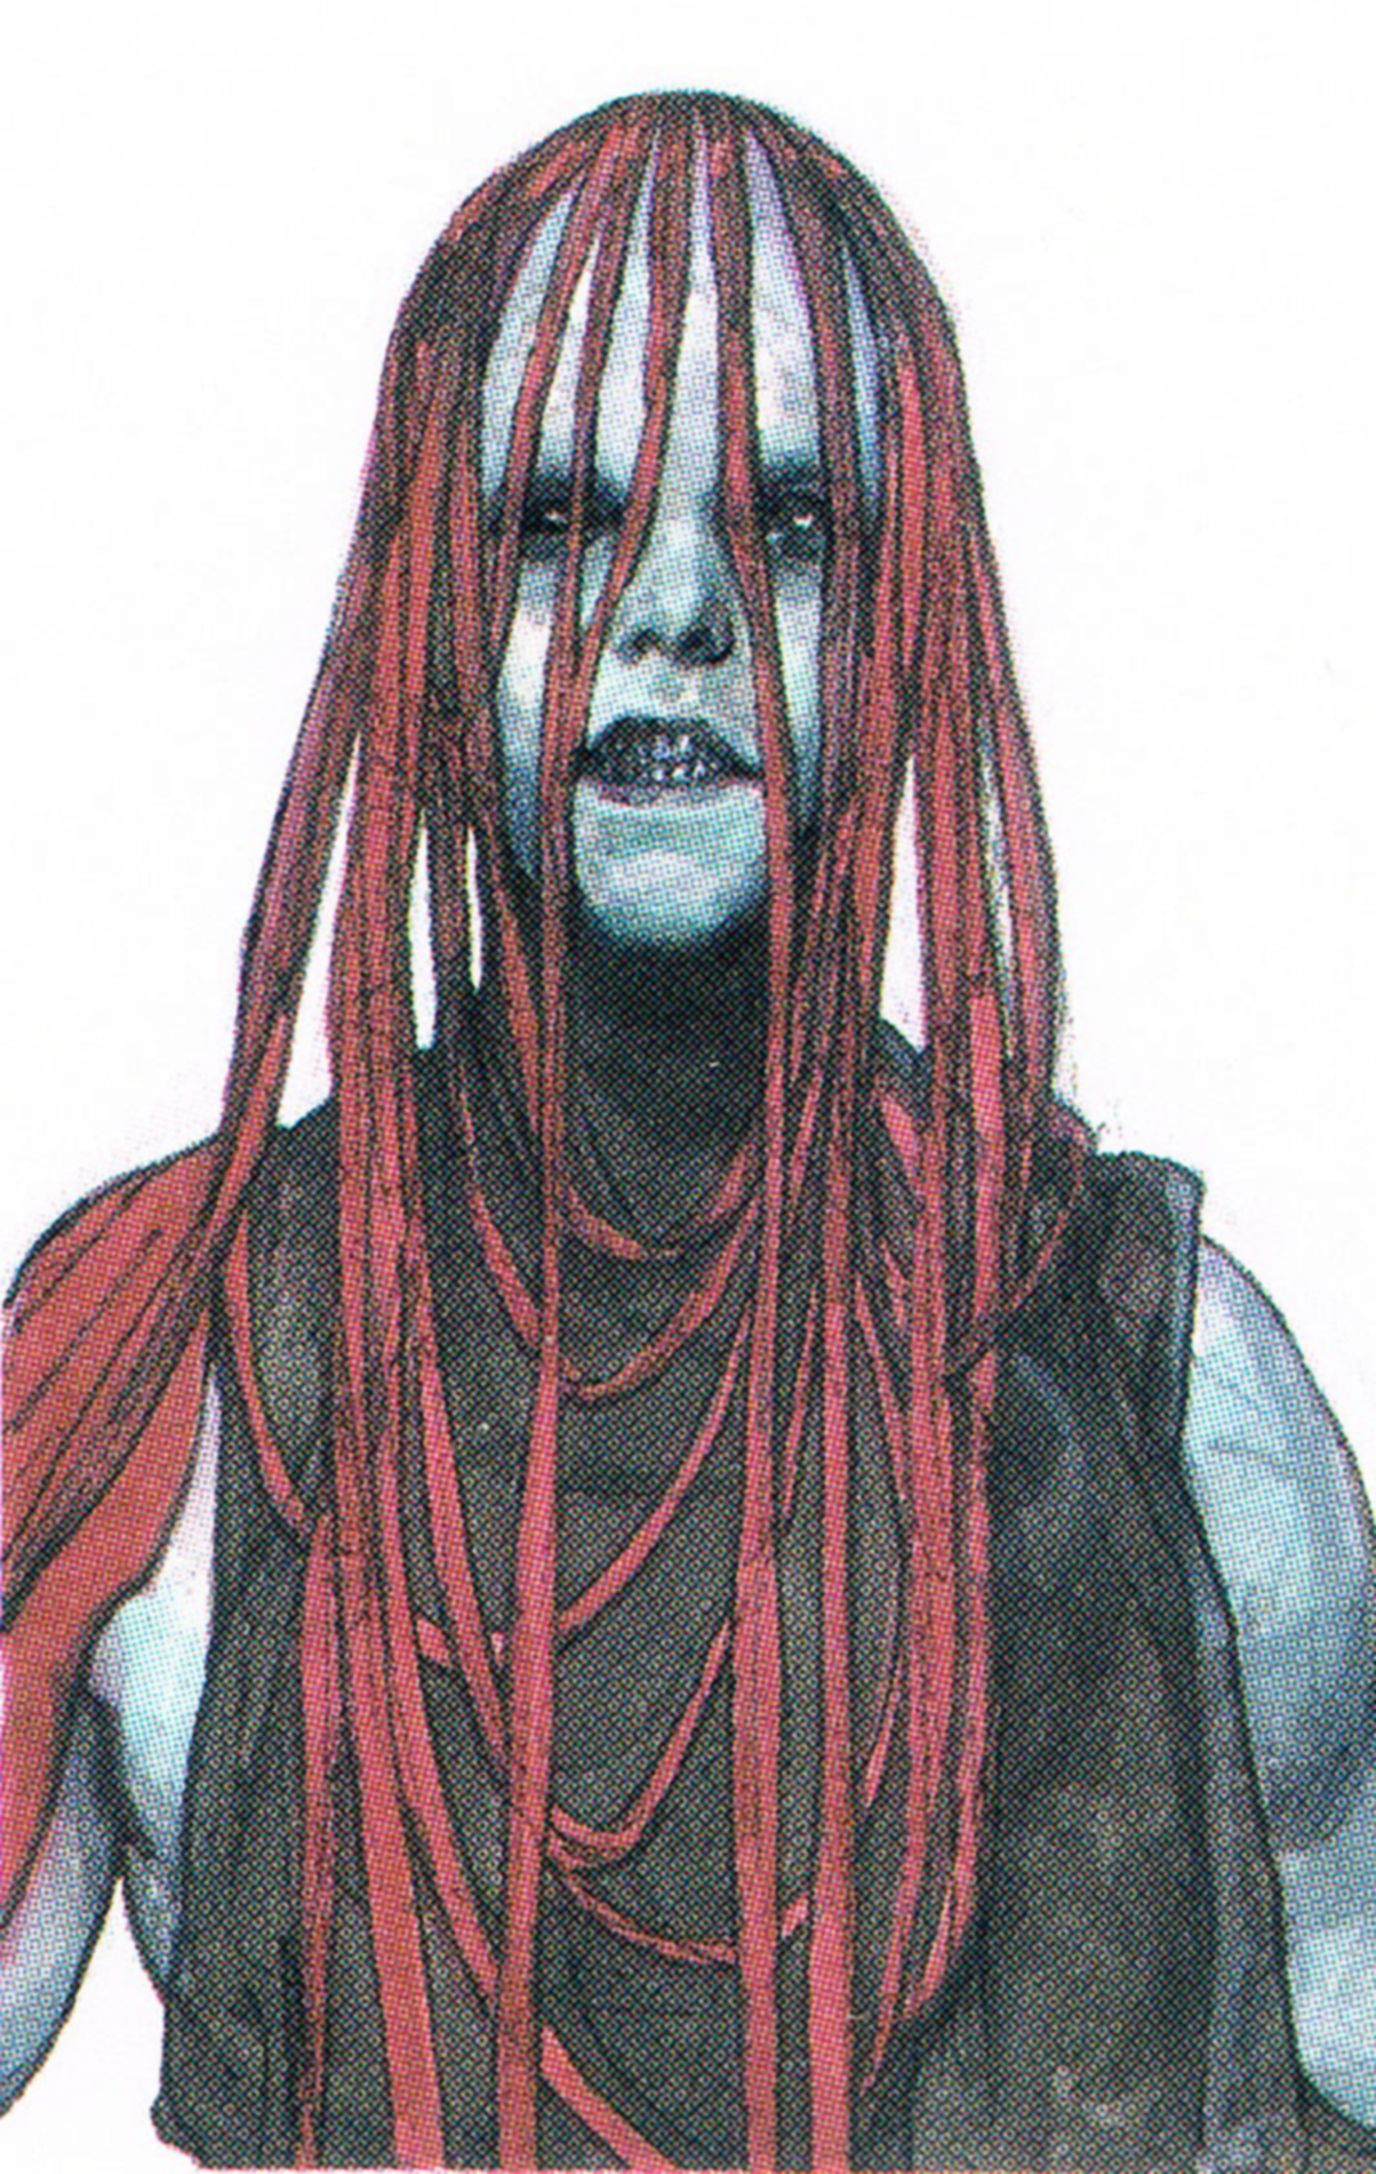 Iain McCaig's original concept art for a Sith Witch in Star Wars: The Phantom Menace